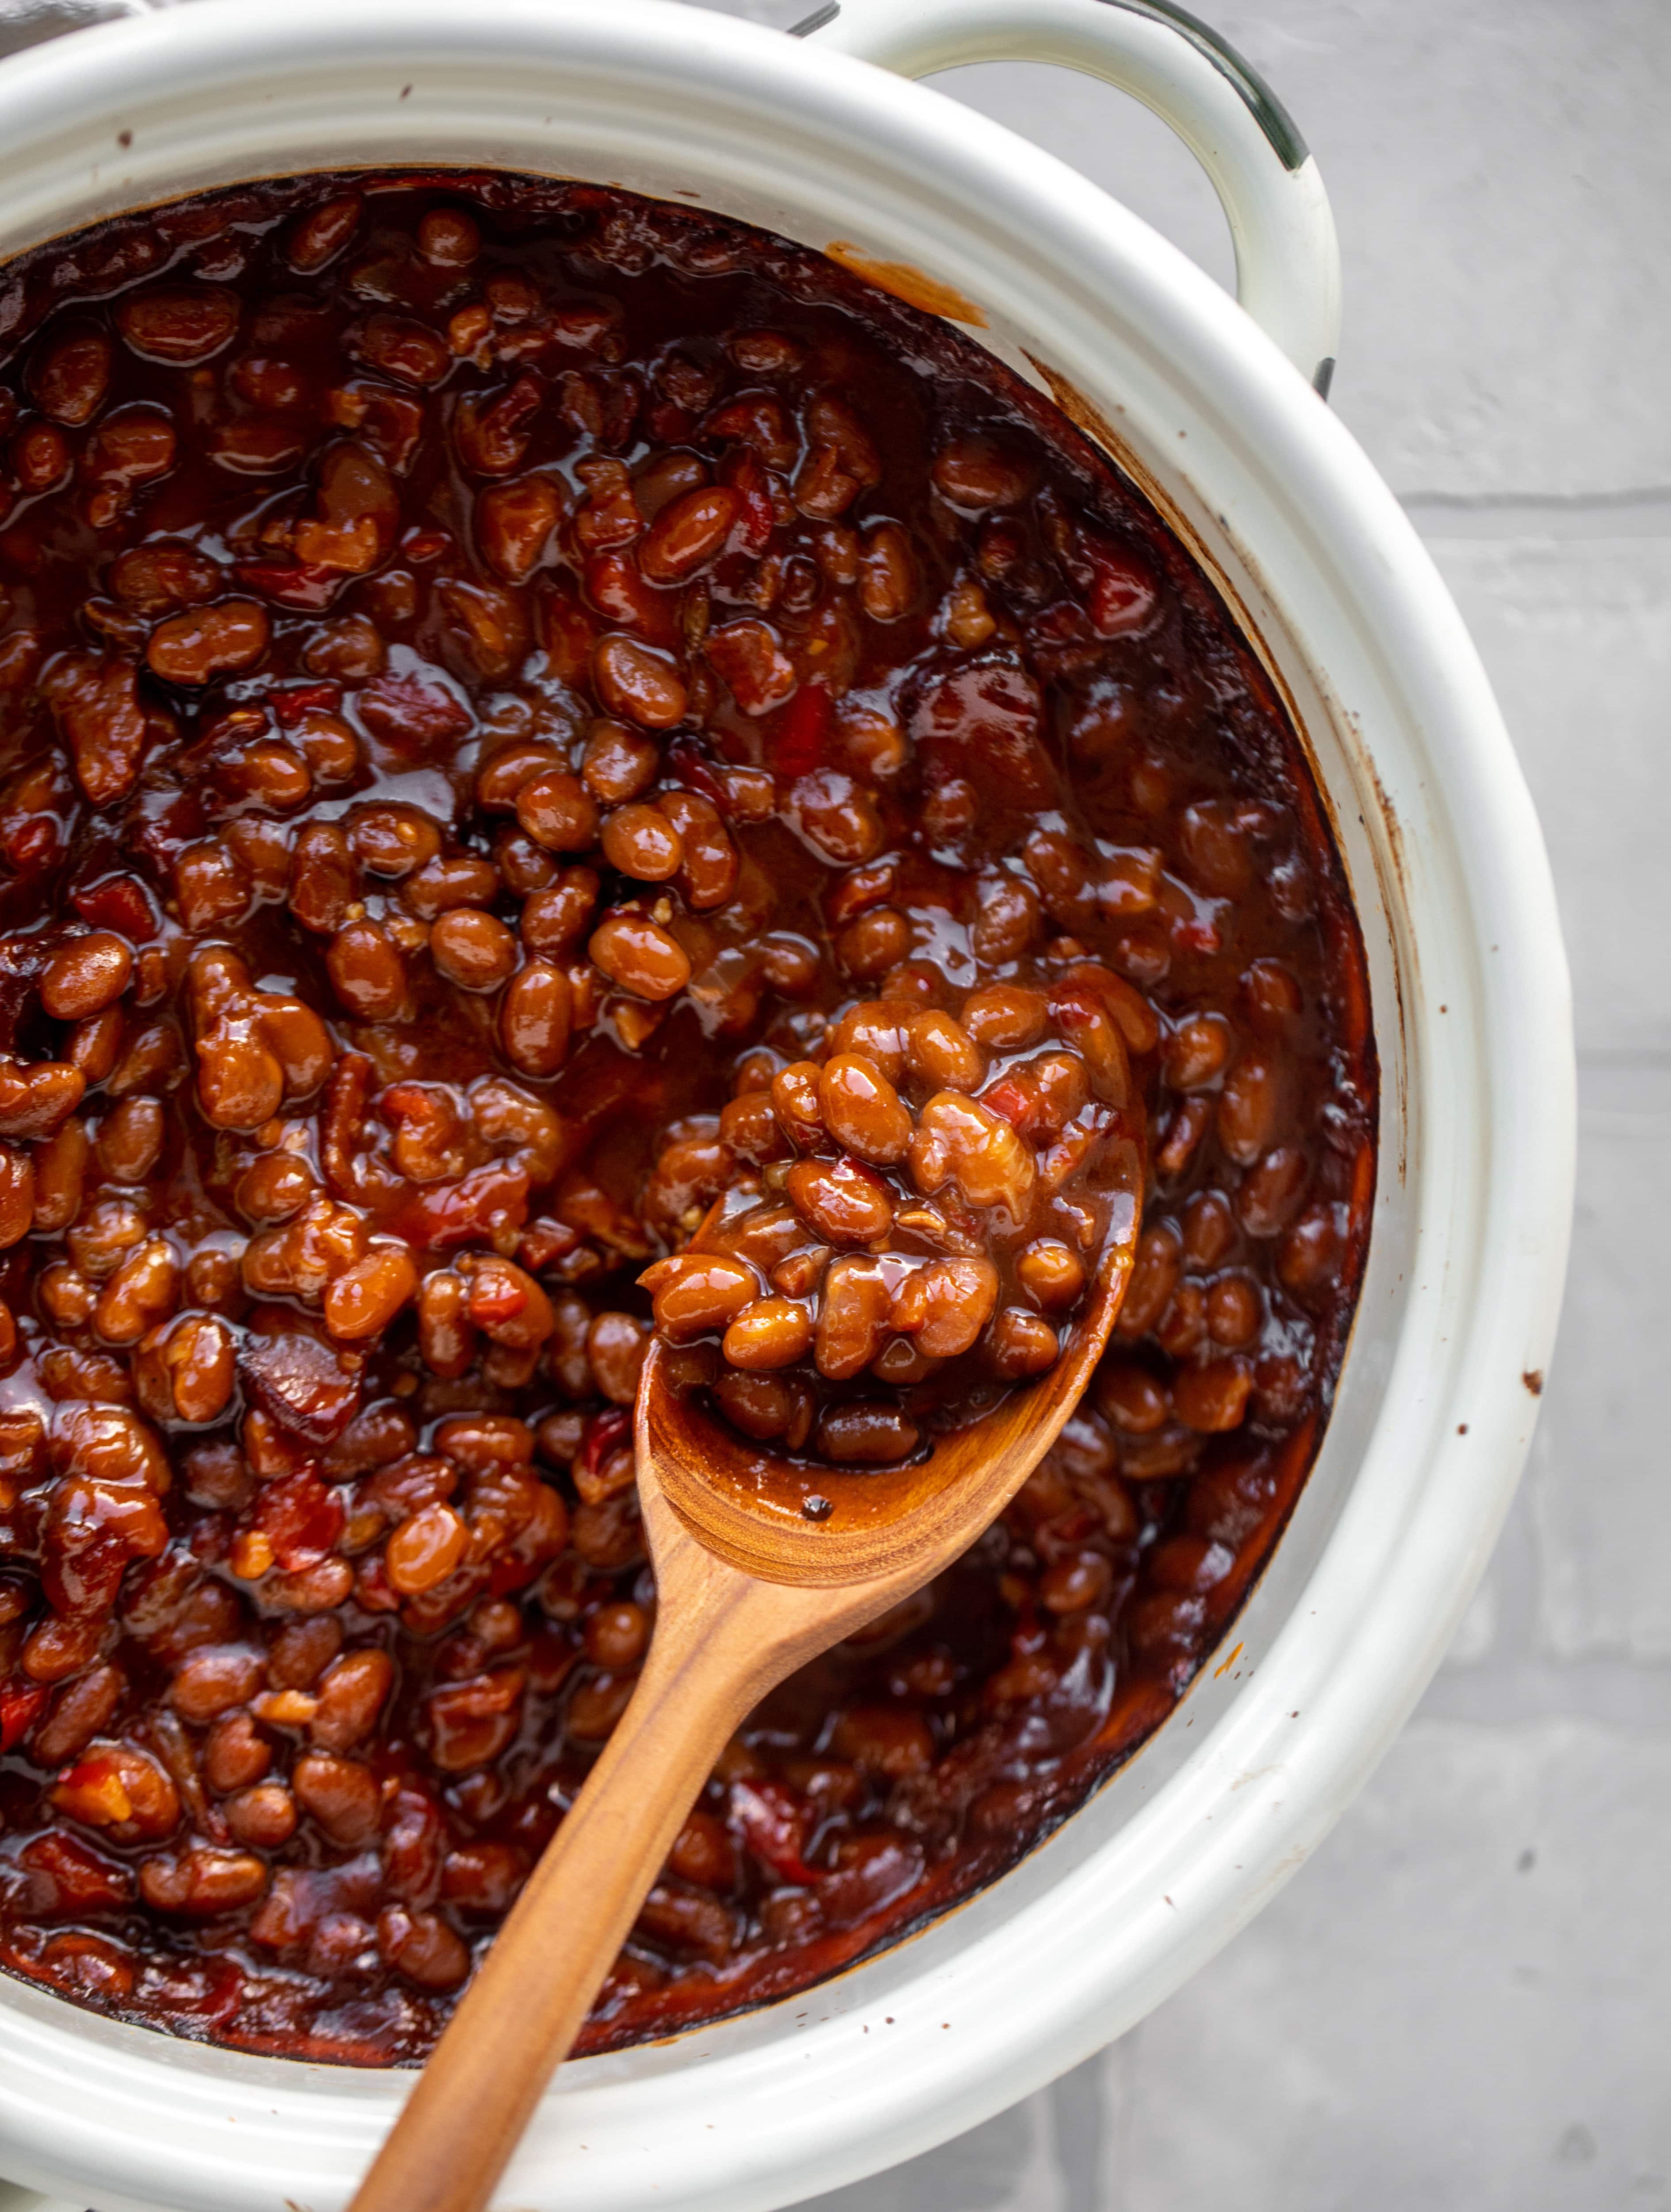 Baked Beans Recipe - Our Favorite Baked Beans Recipe